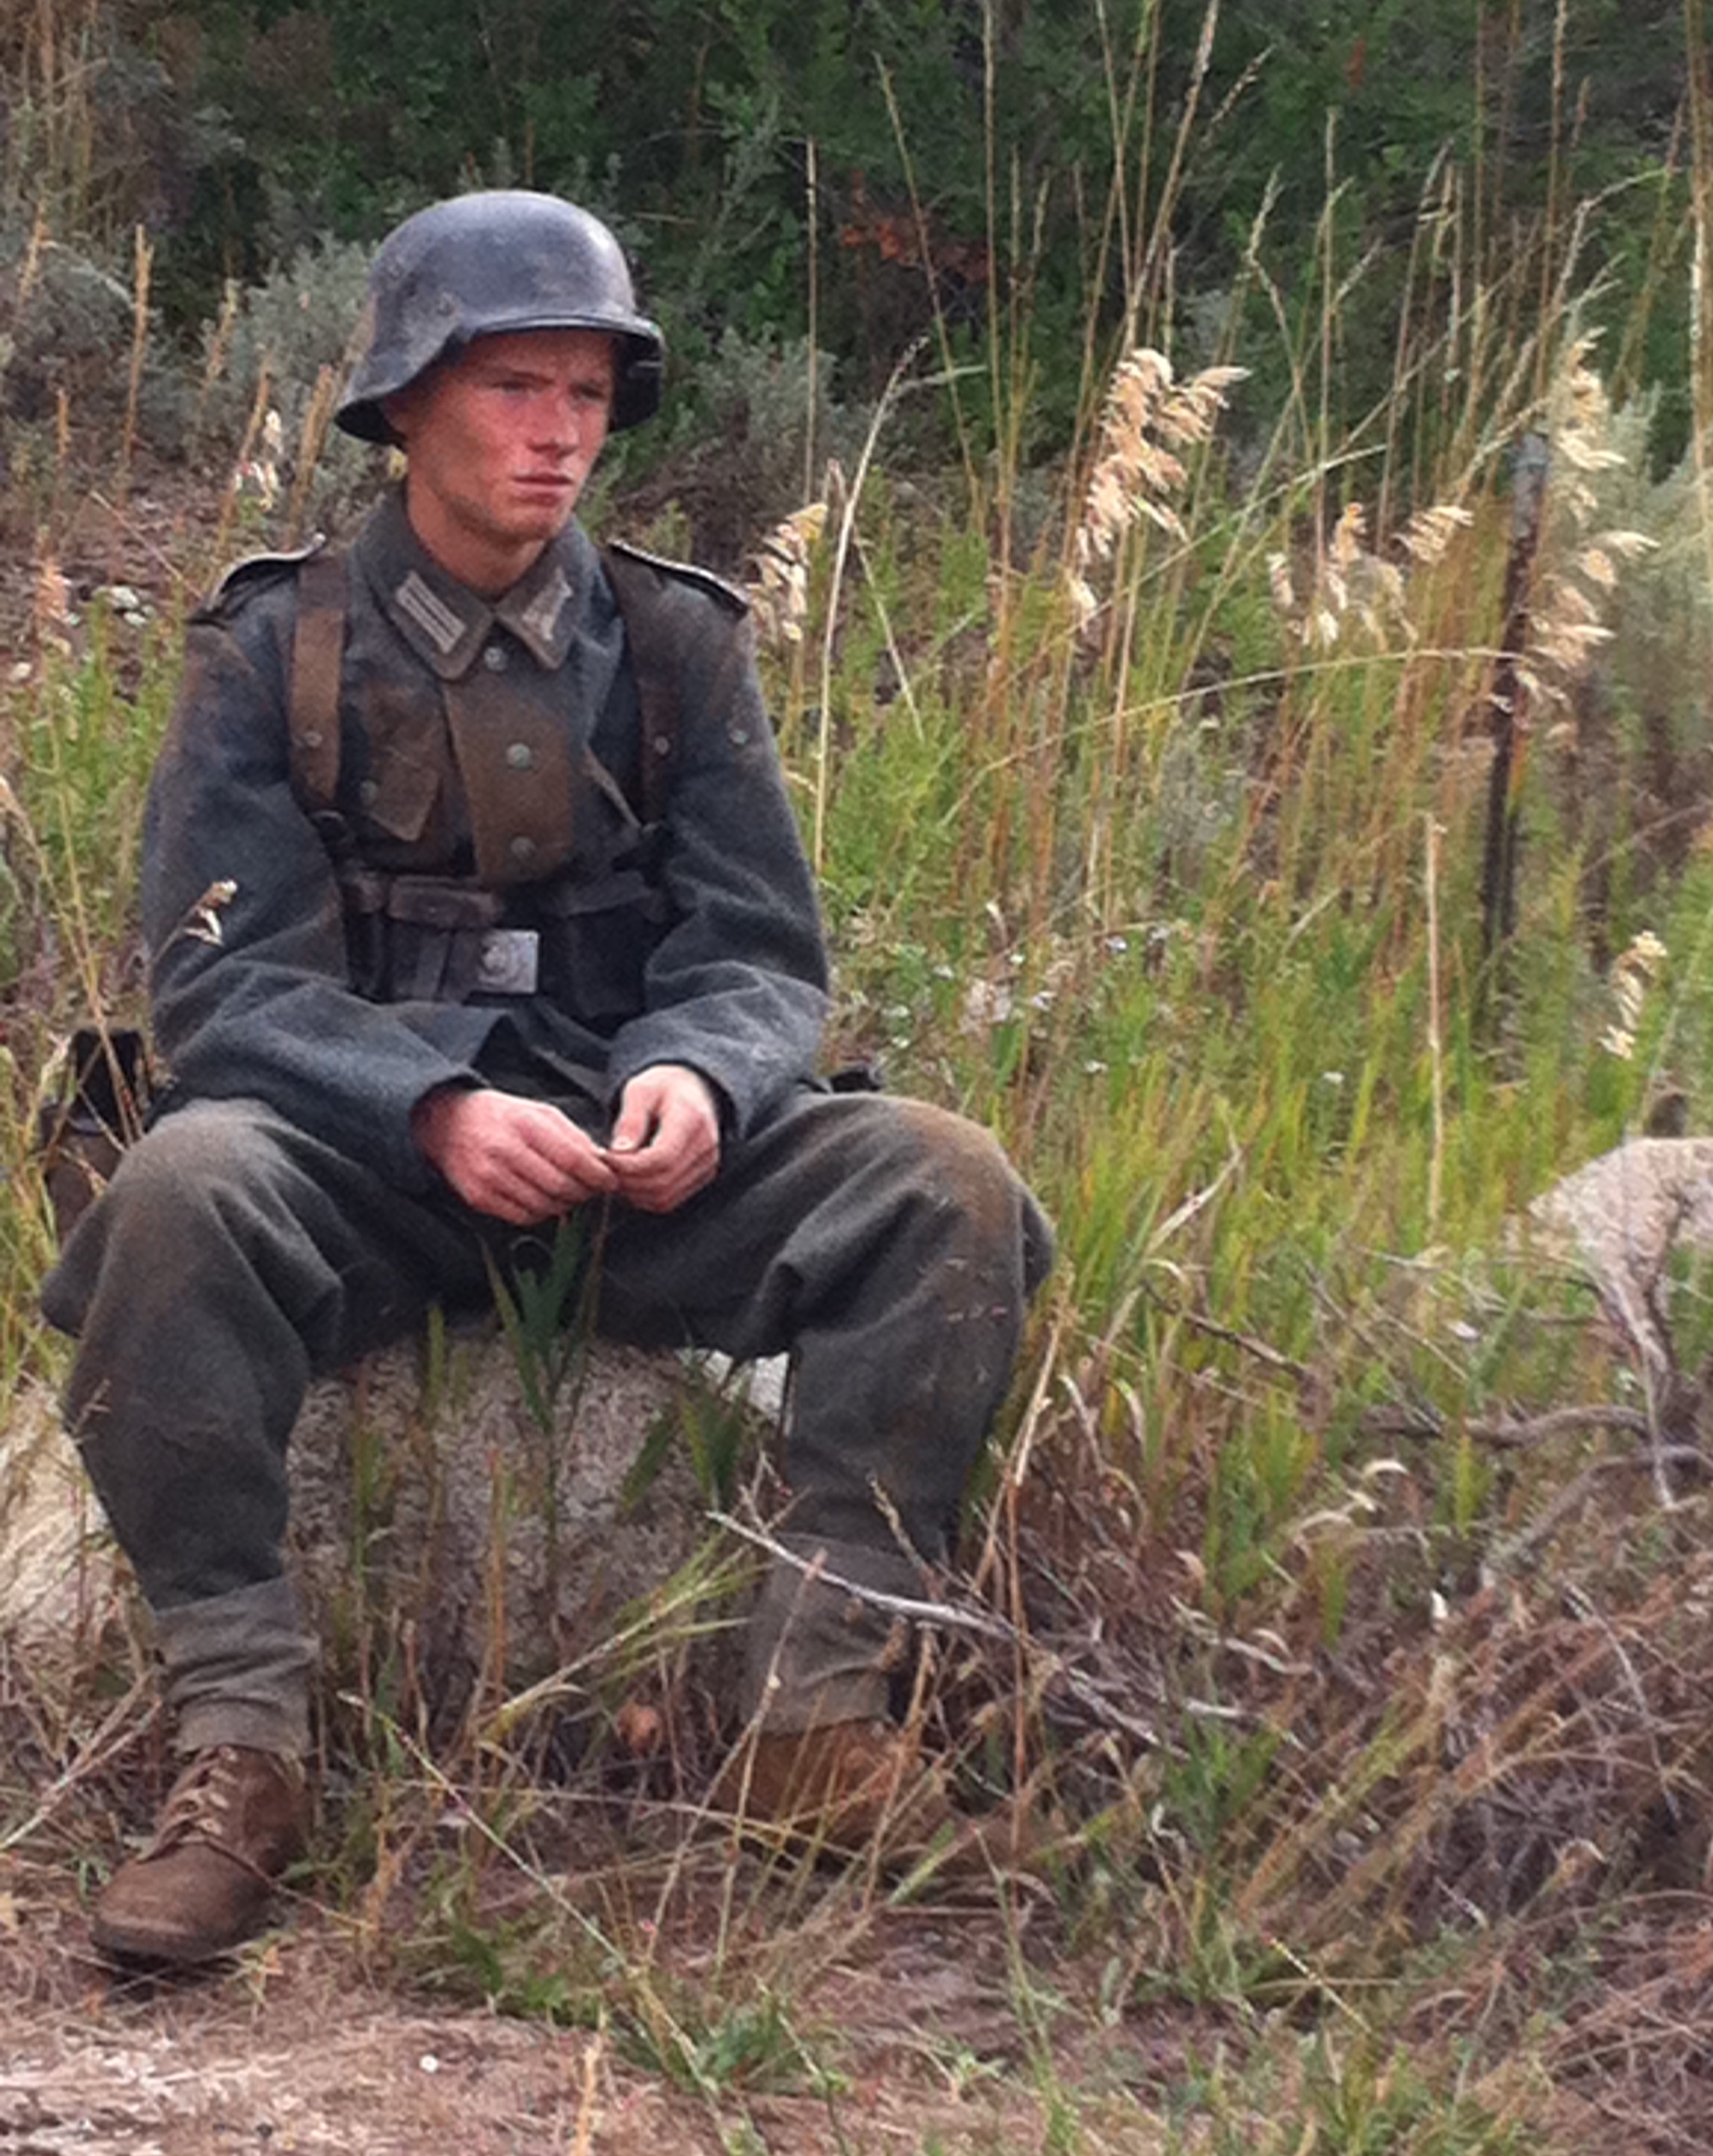 Talon Ackerman as Fritz Bauer on the set of Saints and Soldiers: The Void